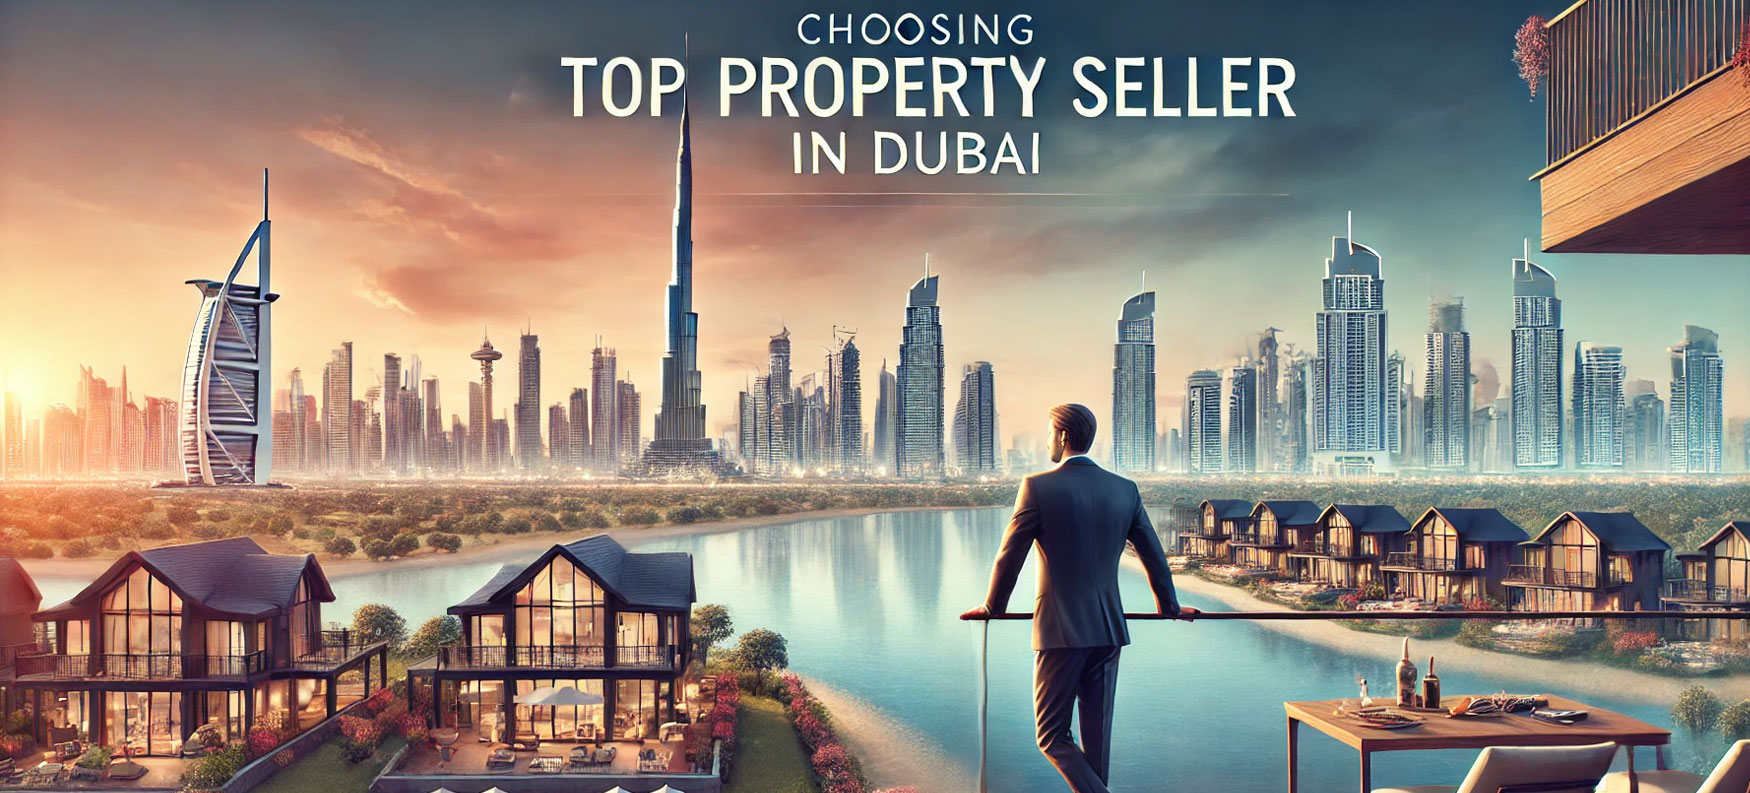 Let’s look at why you need to hire a top real estate agent to sell your property in Dubai.